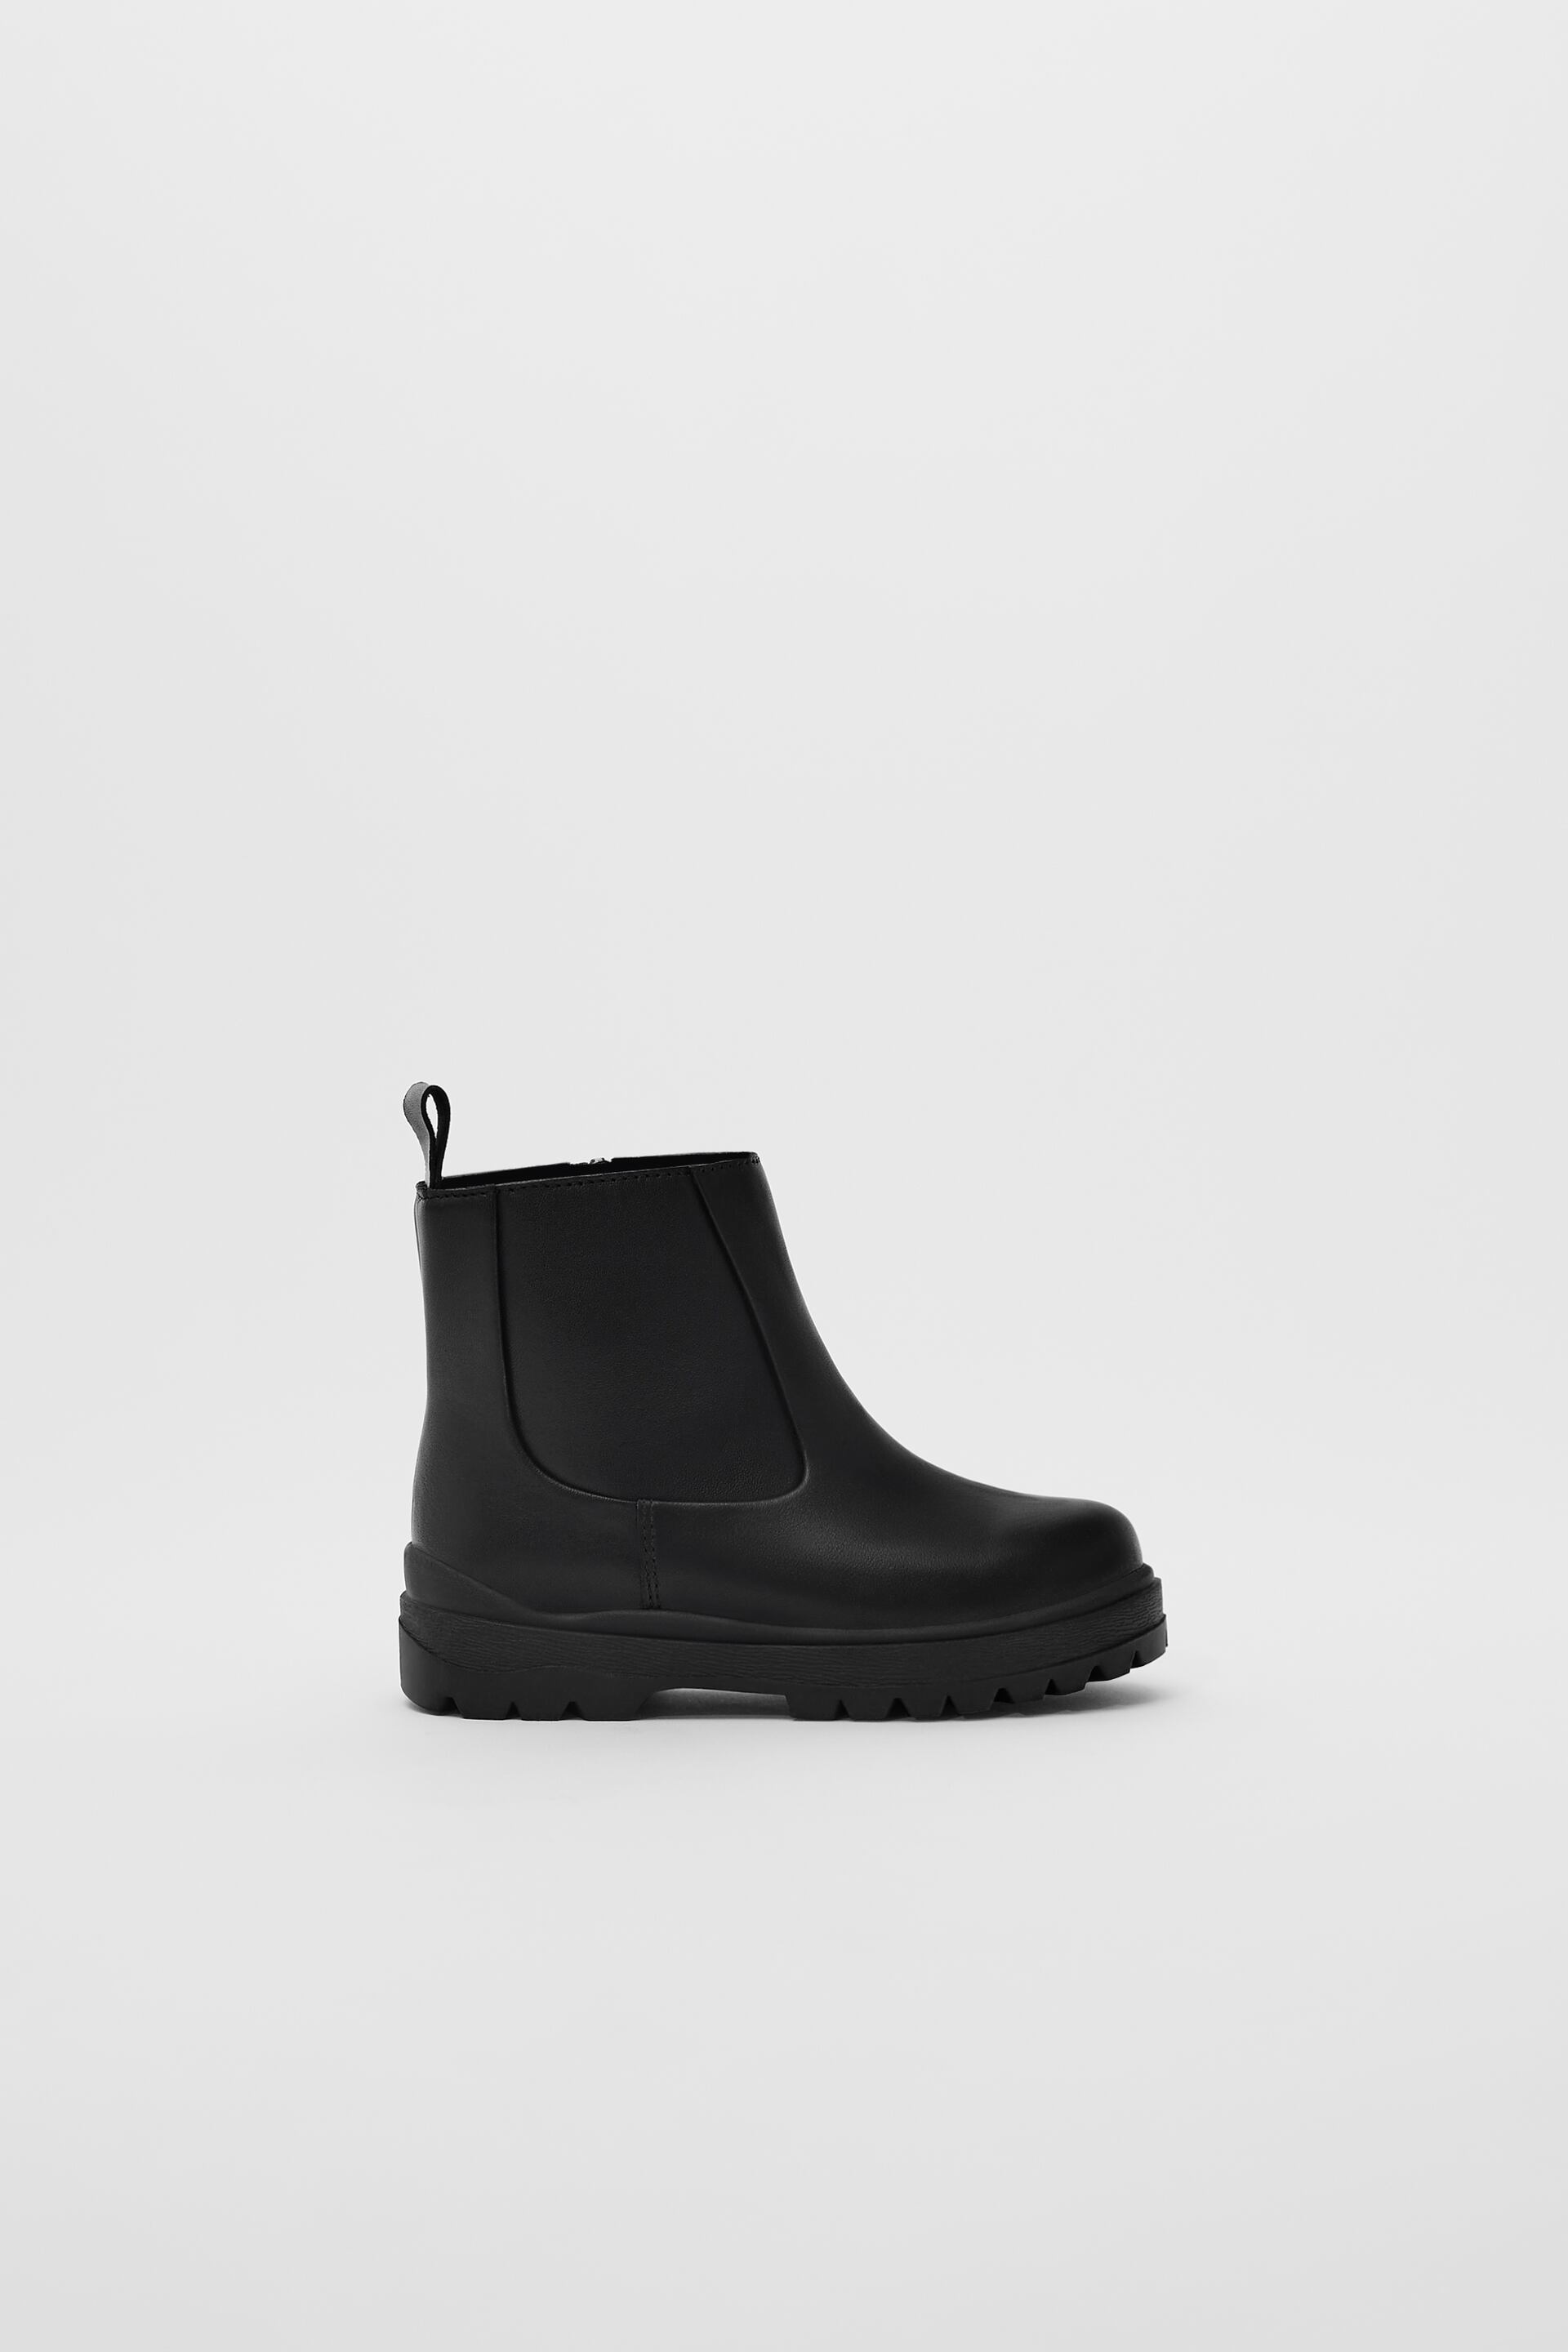 Zara LEATHER BOOTS - 51416460-040-2